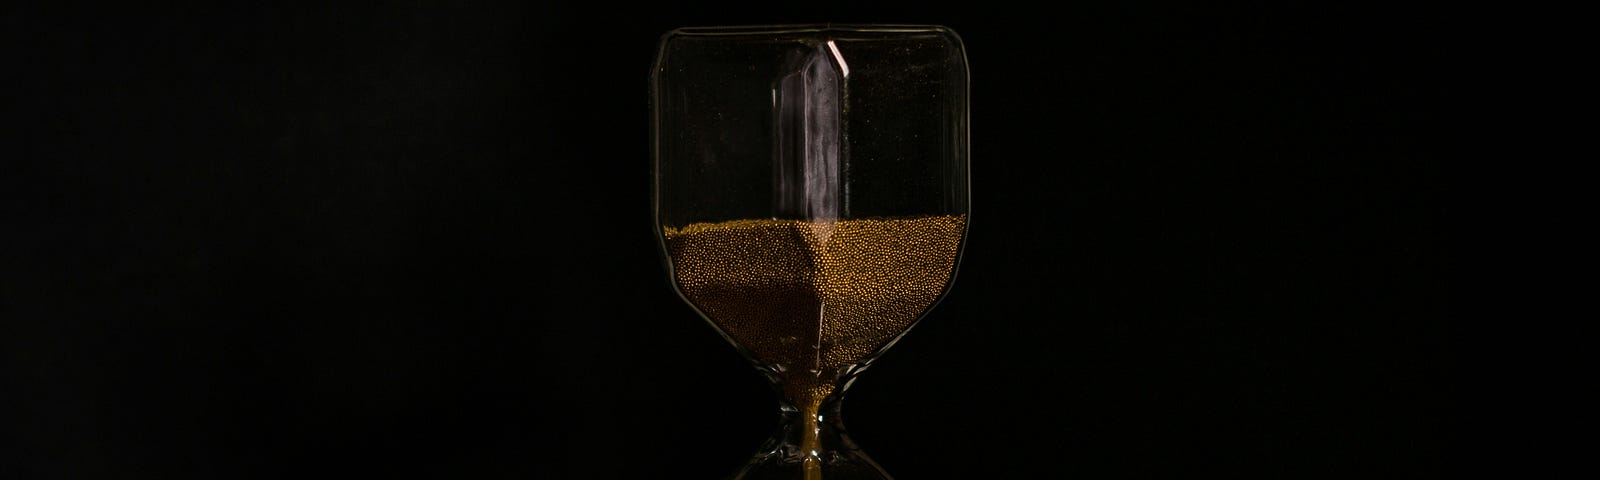 An hourglass on a bed of red rose petals, set in a black background.